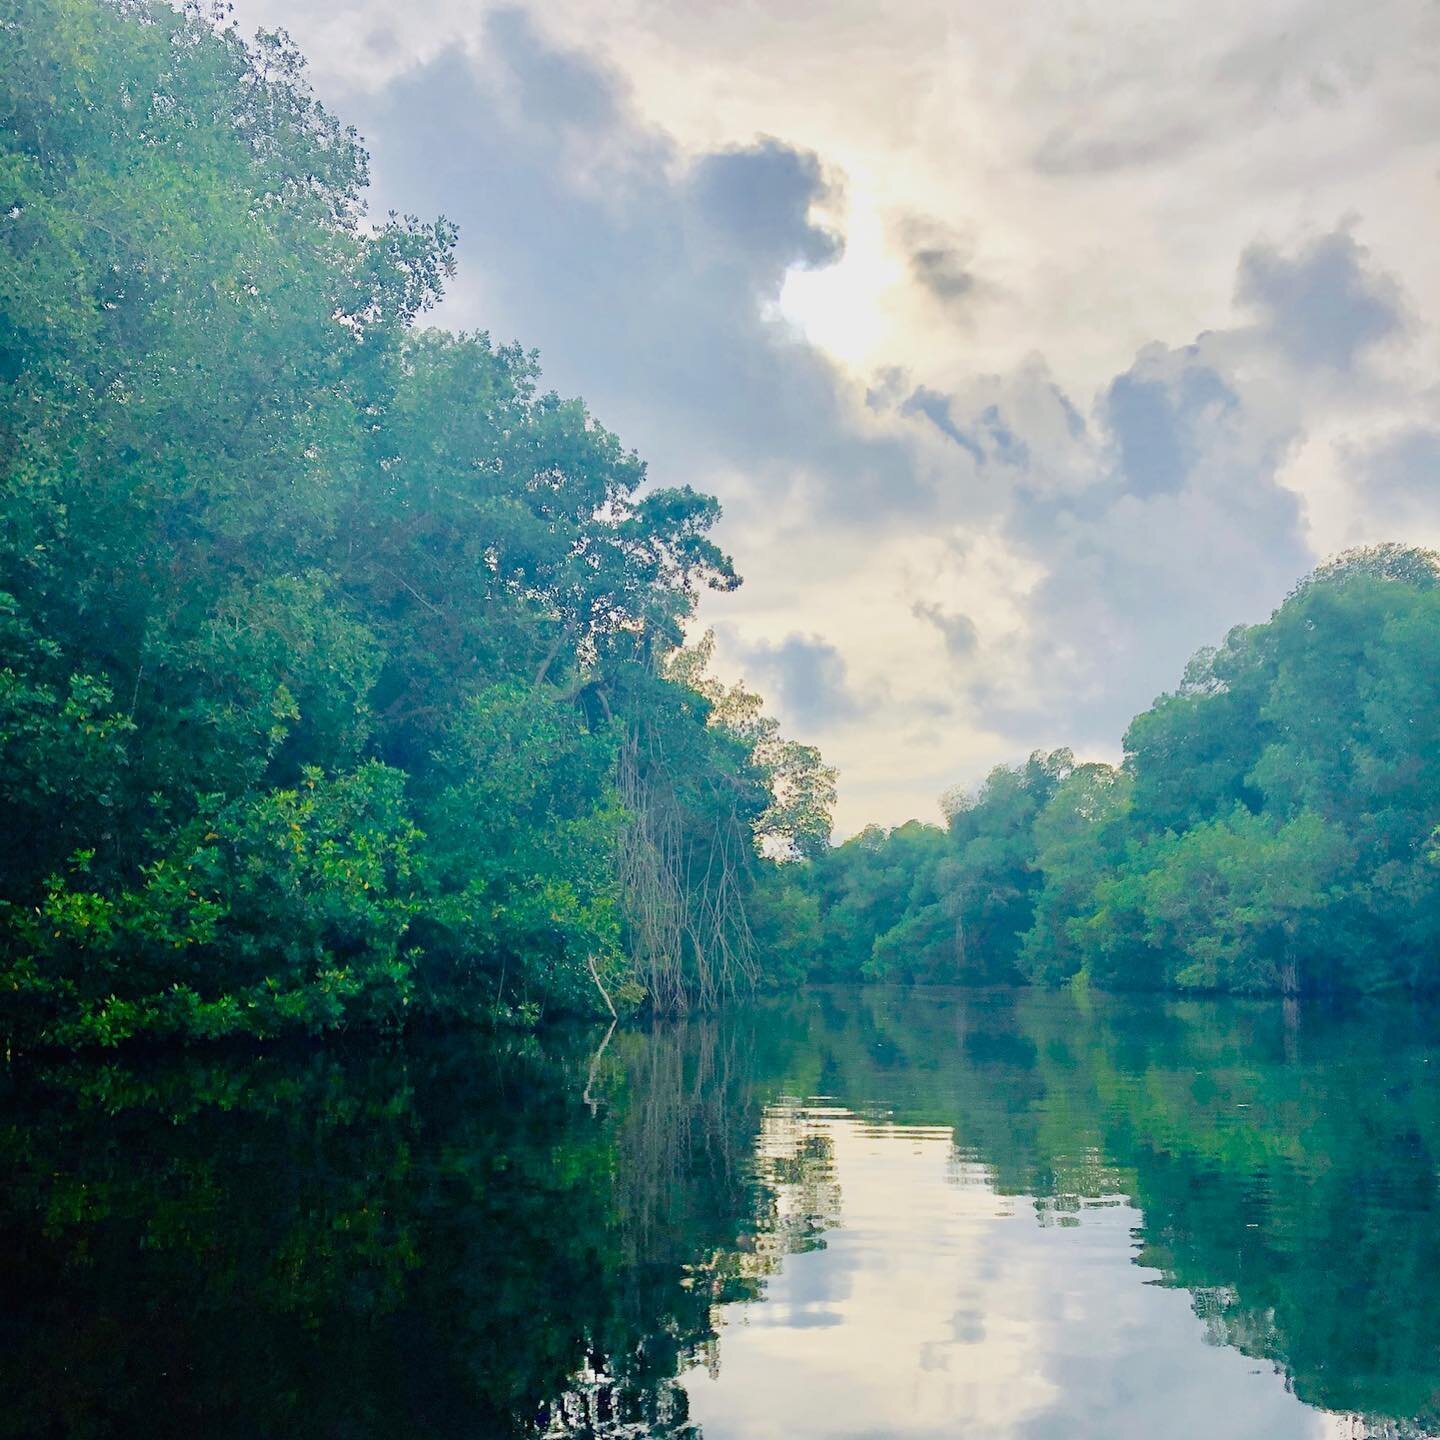 Passionate about climate #mitigation, #adaptation and #naturebasedsolutions?  Come join the @ConservationOrg #BlueCarbon team to develop mangrove projects in Asia-Pacific - based in Singapore - Blue Carbon Science, Asia Pacific Field Division Directo